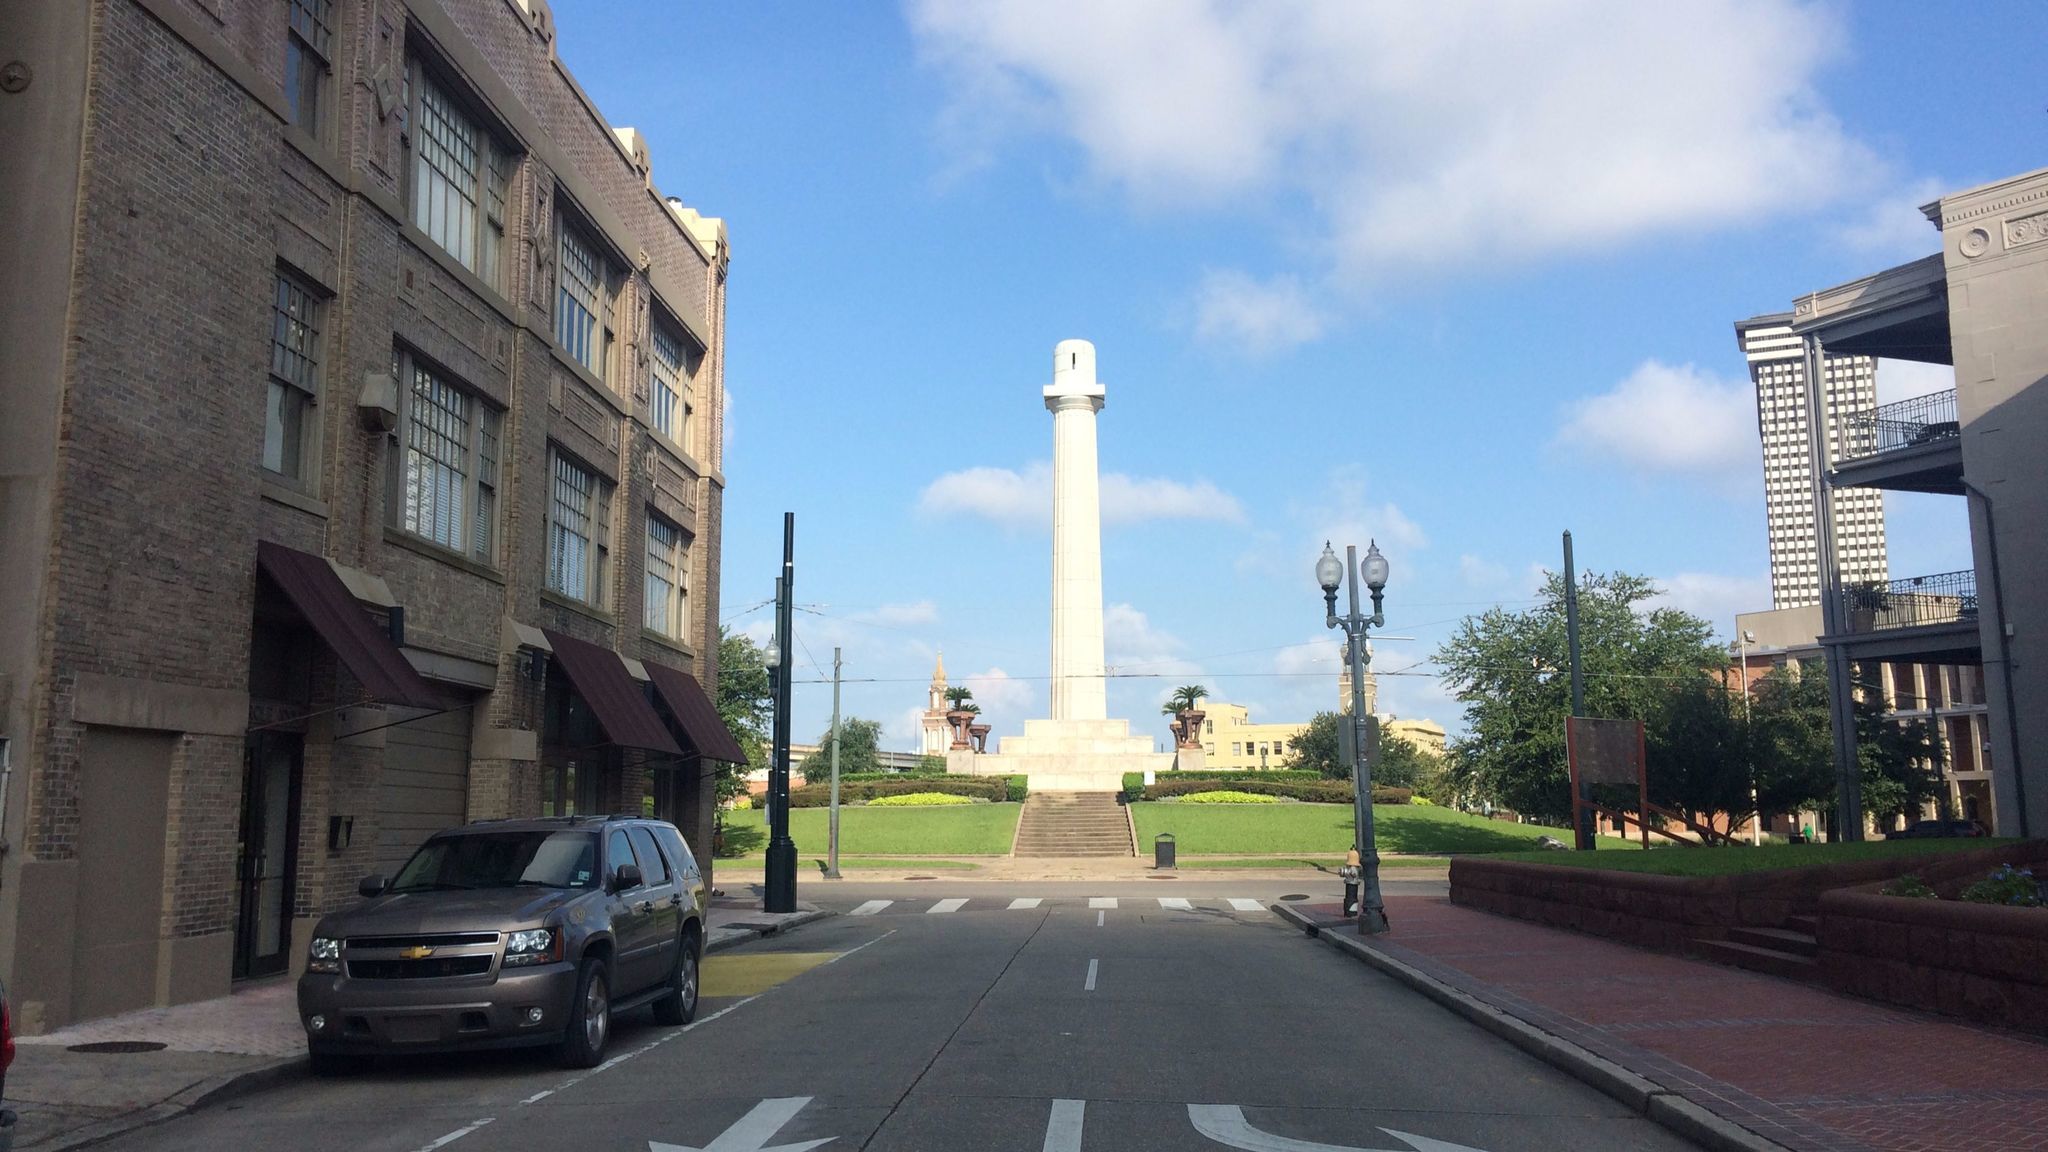 The spot where a Robert E. Lee statue stood until May 27, 2017, in New Orleans.